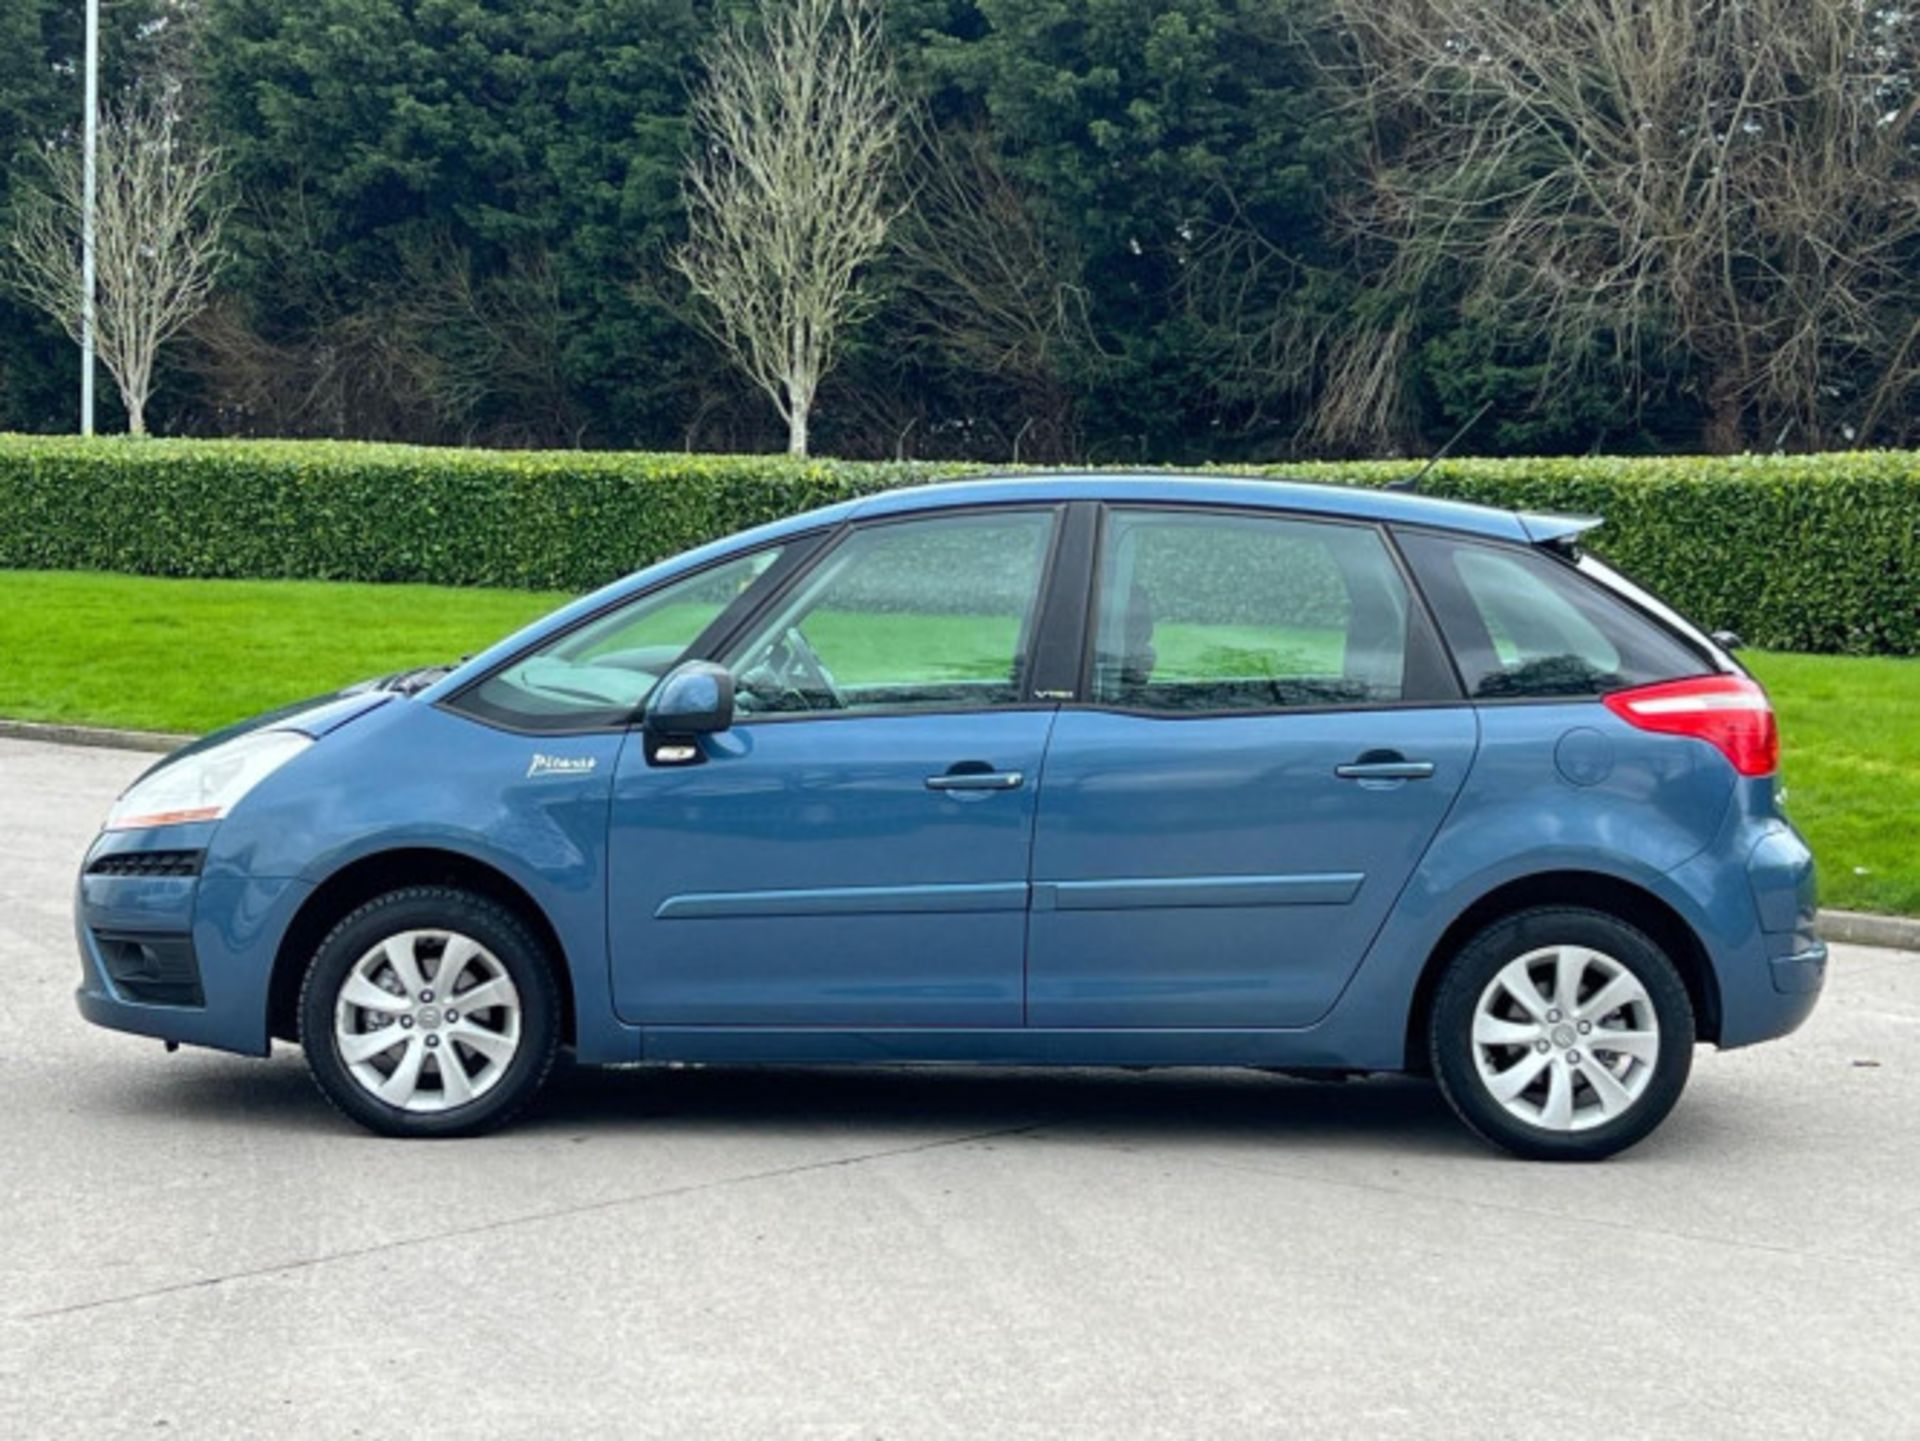 2009 CITROEN C4 PICASSO 1.6 HDI VTR+ EGS6 5DR >>--NO VAT ON HAMMER--<< - Image 111 of 123